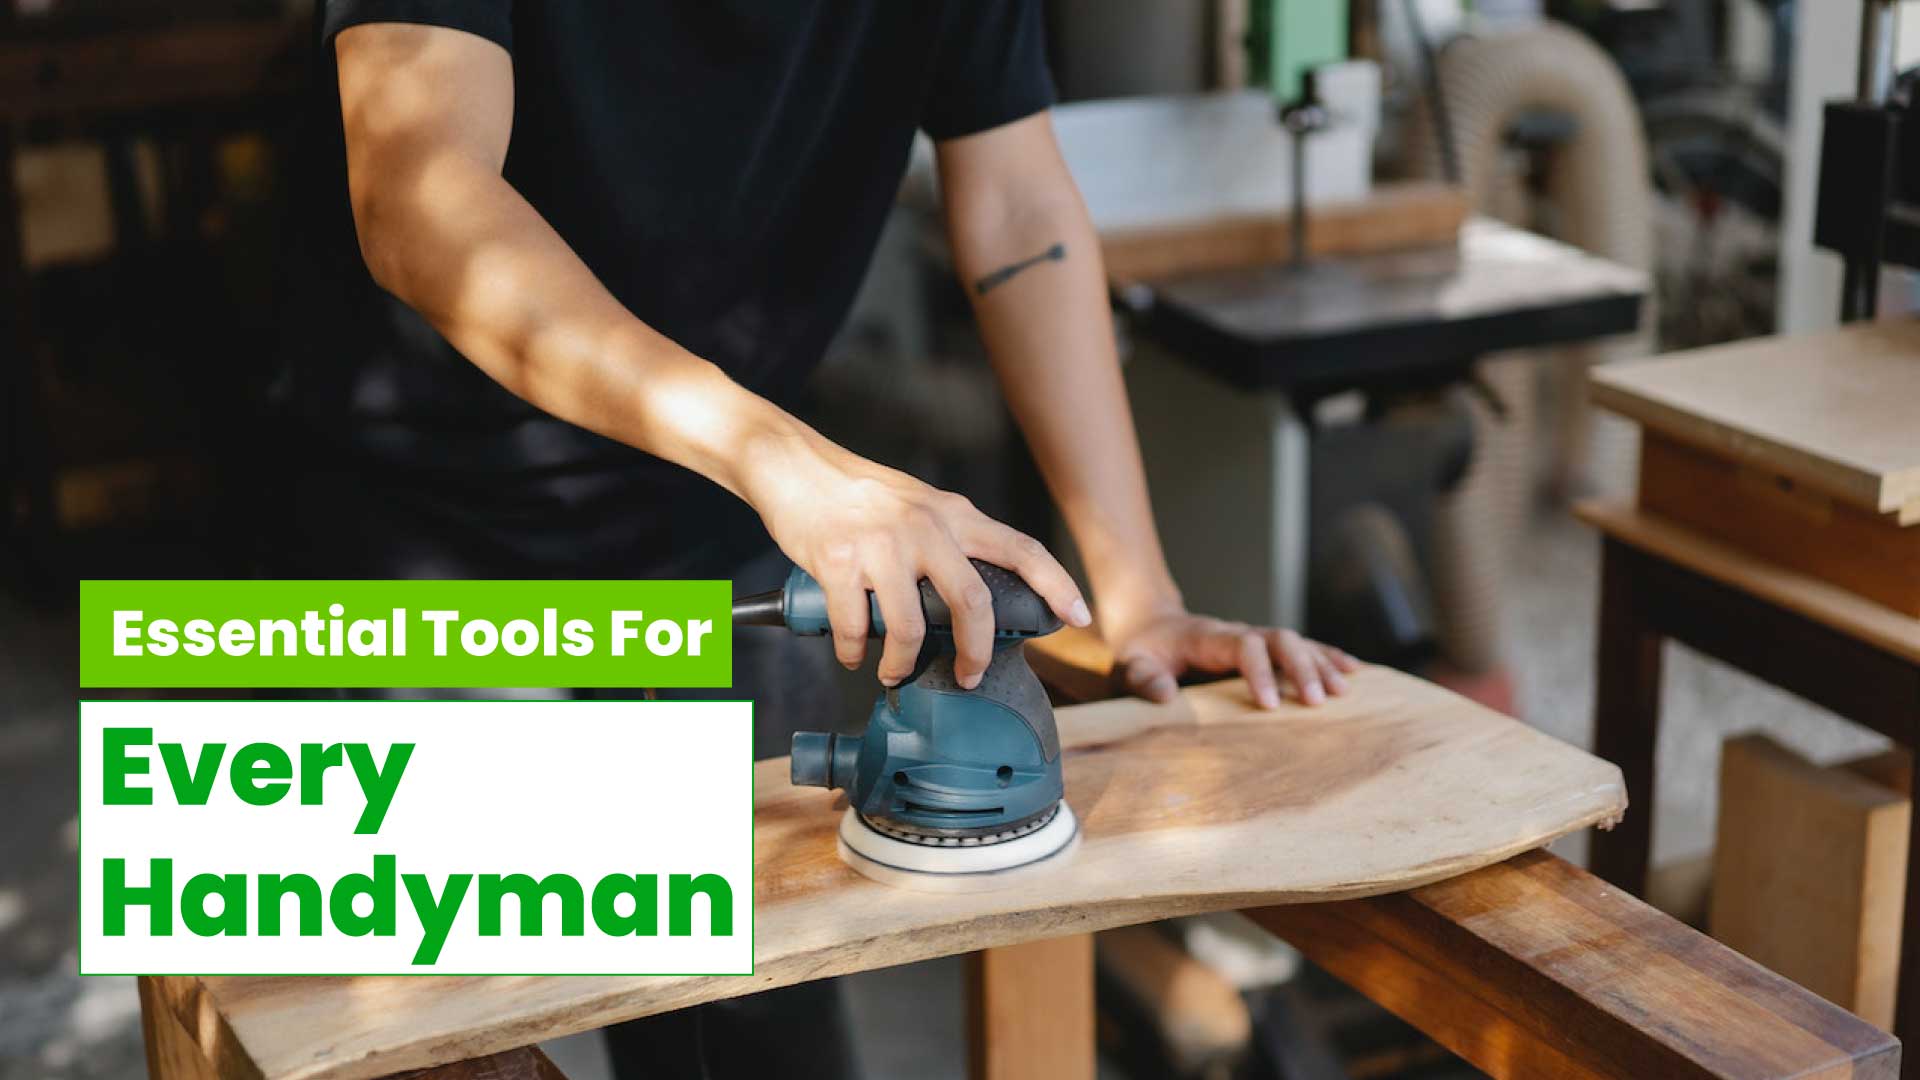 The Essential Tools for Every Handyman - Article by Nesmt Almalaky